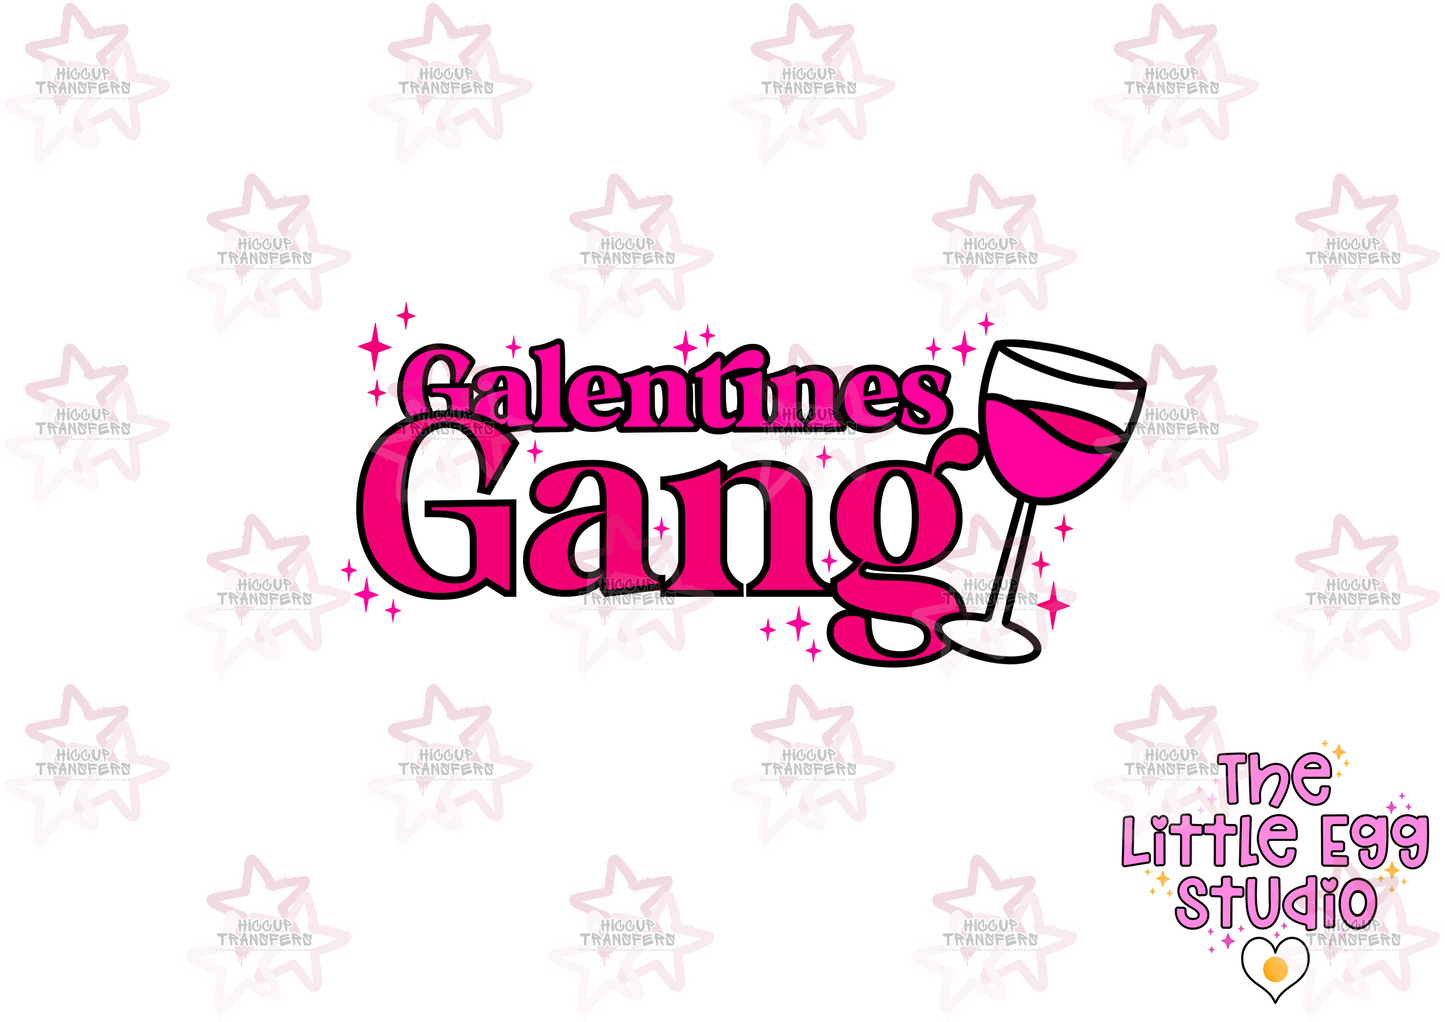 Galentine’s Gang | The Little Egg Studio | 3” UVDTF Decal